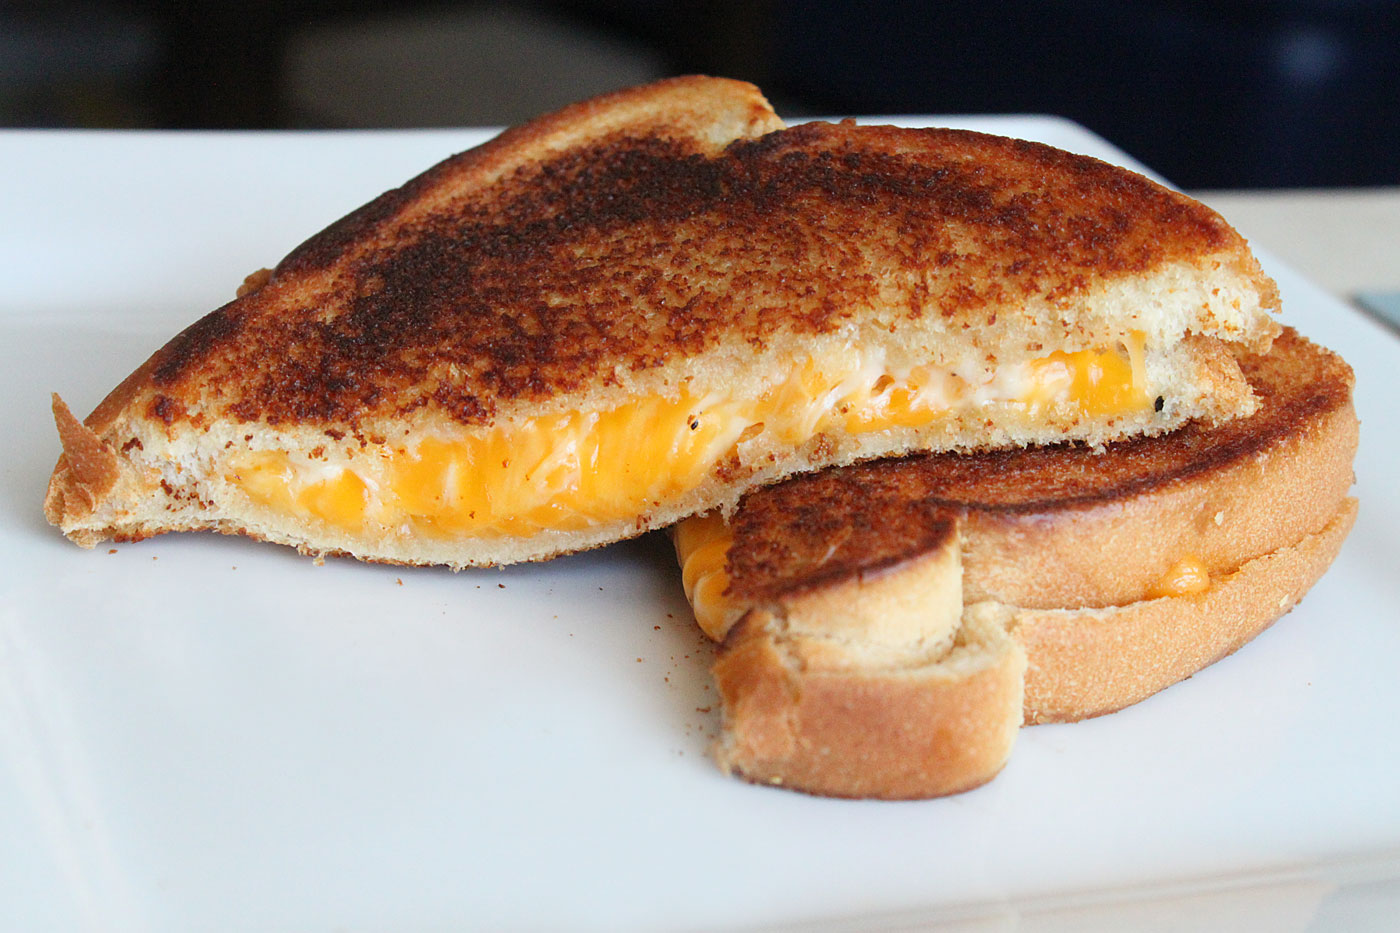 Best Grilled Cheese Recipe - How to Make Grilled Cheese